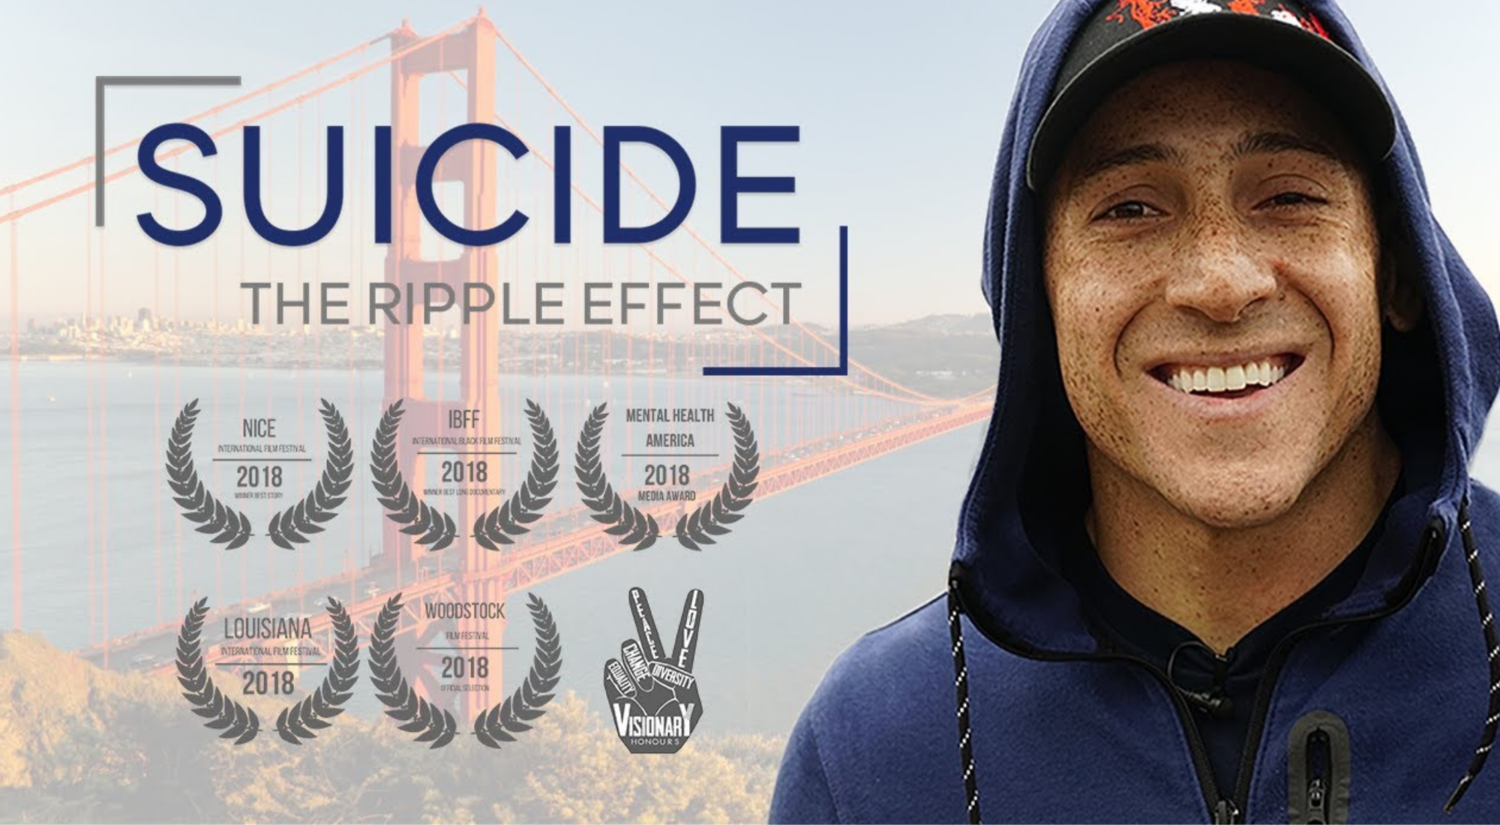 A man in a baseball cap and a sweatshirt with the hood up smiles against a background image of the Golden Gate bridge. The left side of the image says Suicide The Ripple Effect with several movie reviews.